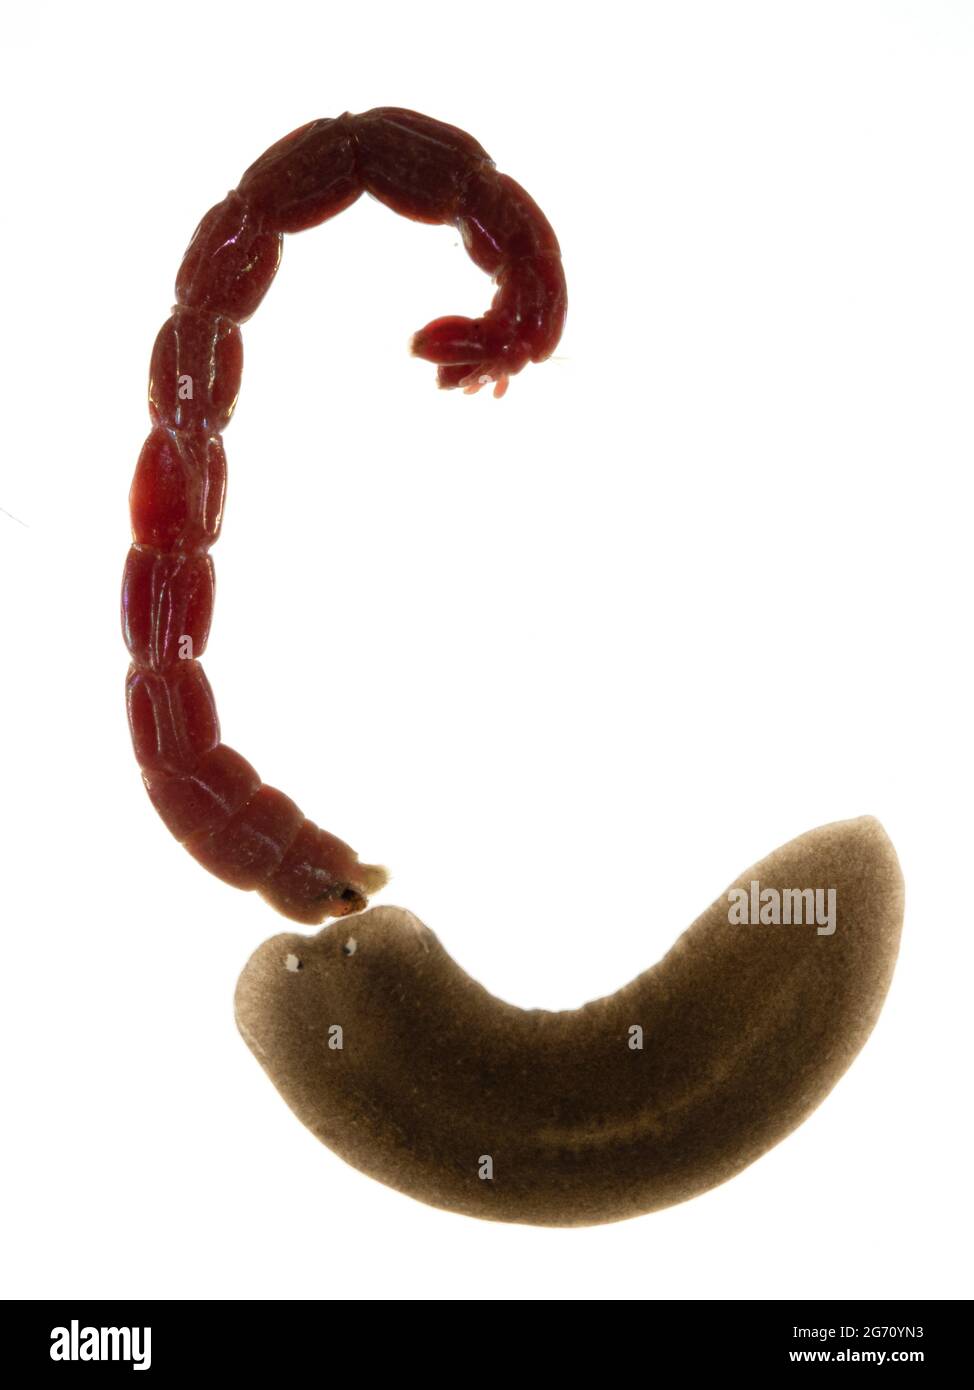 vertical image of a freshwater triclad flatworm (planarian) (Schmidtea polychroa) investigating a dead bloodworm (chironomid midge larva) Stock Photo